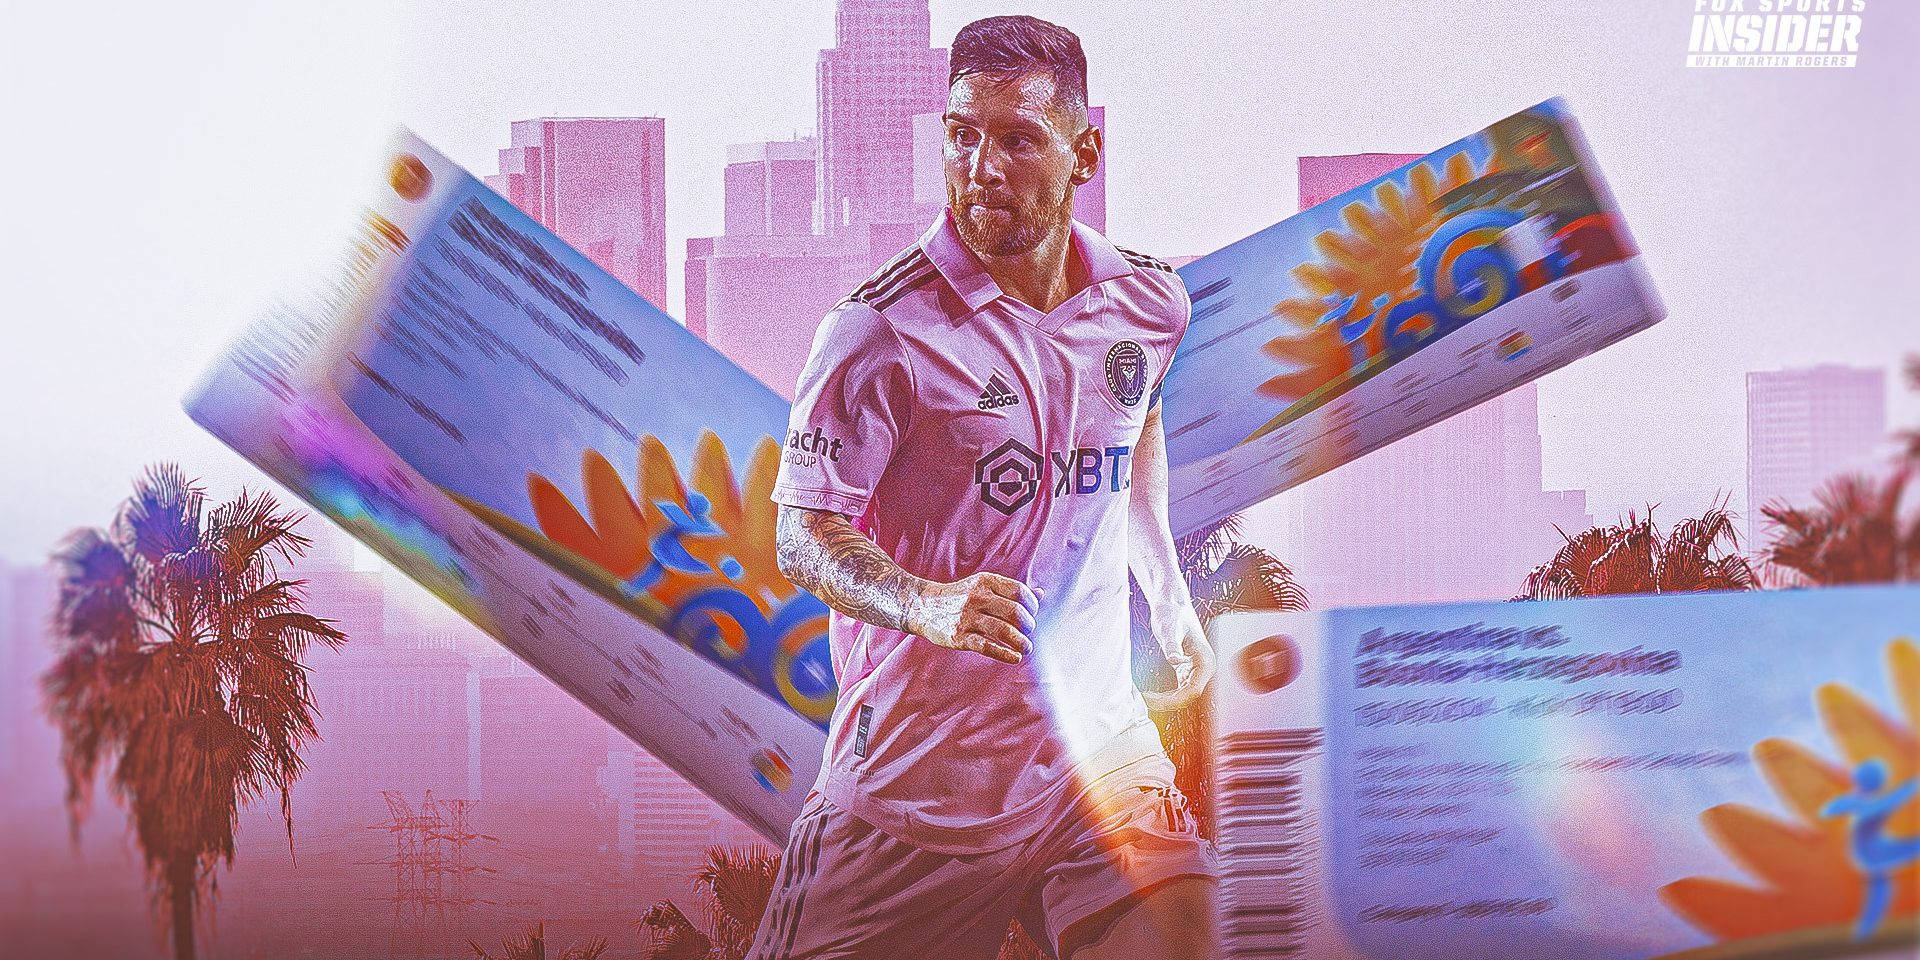 Lionel Messi brought the hype train to LA, and delivered as always